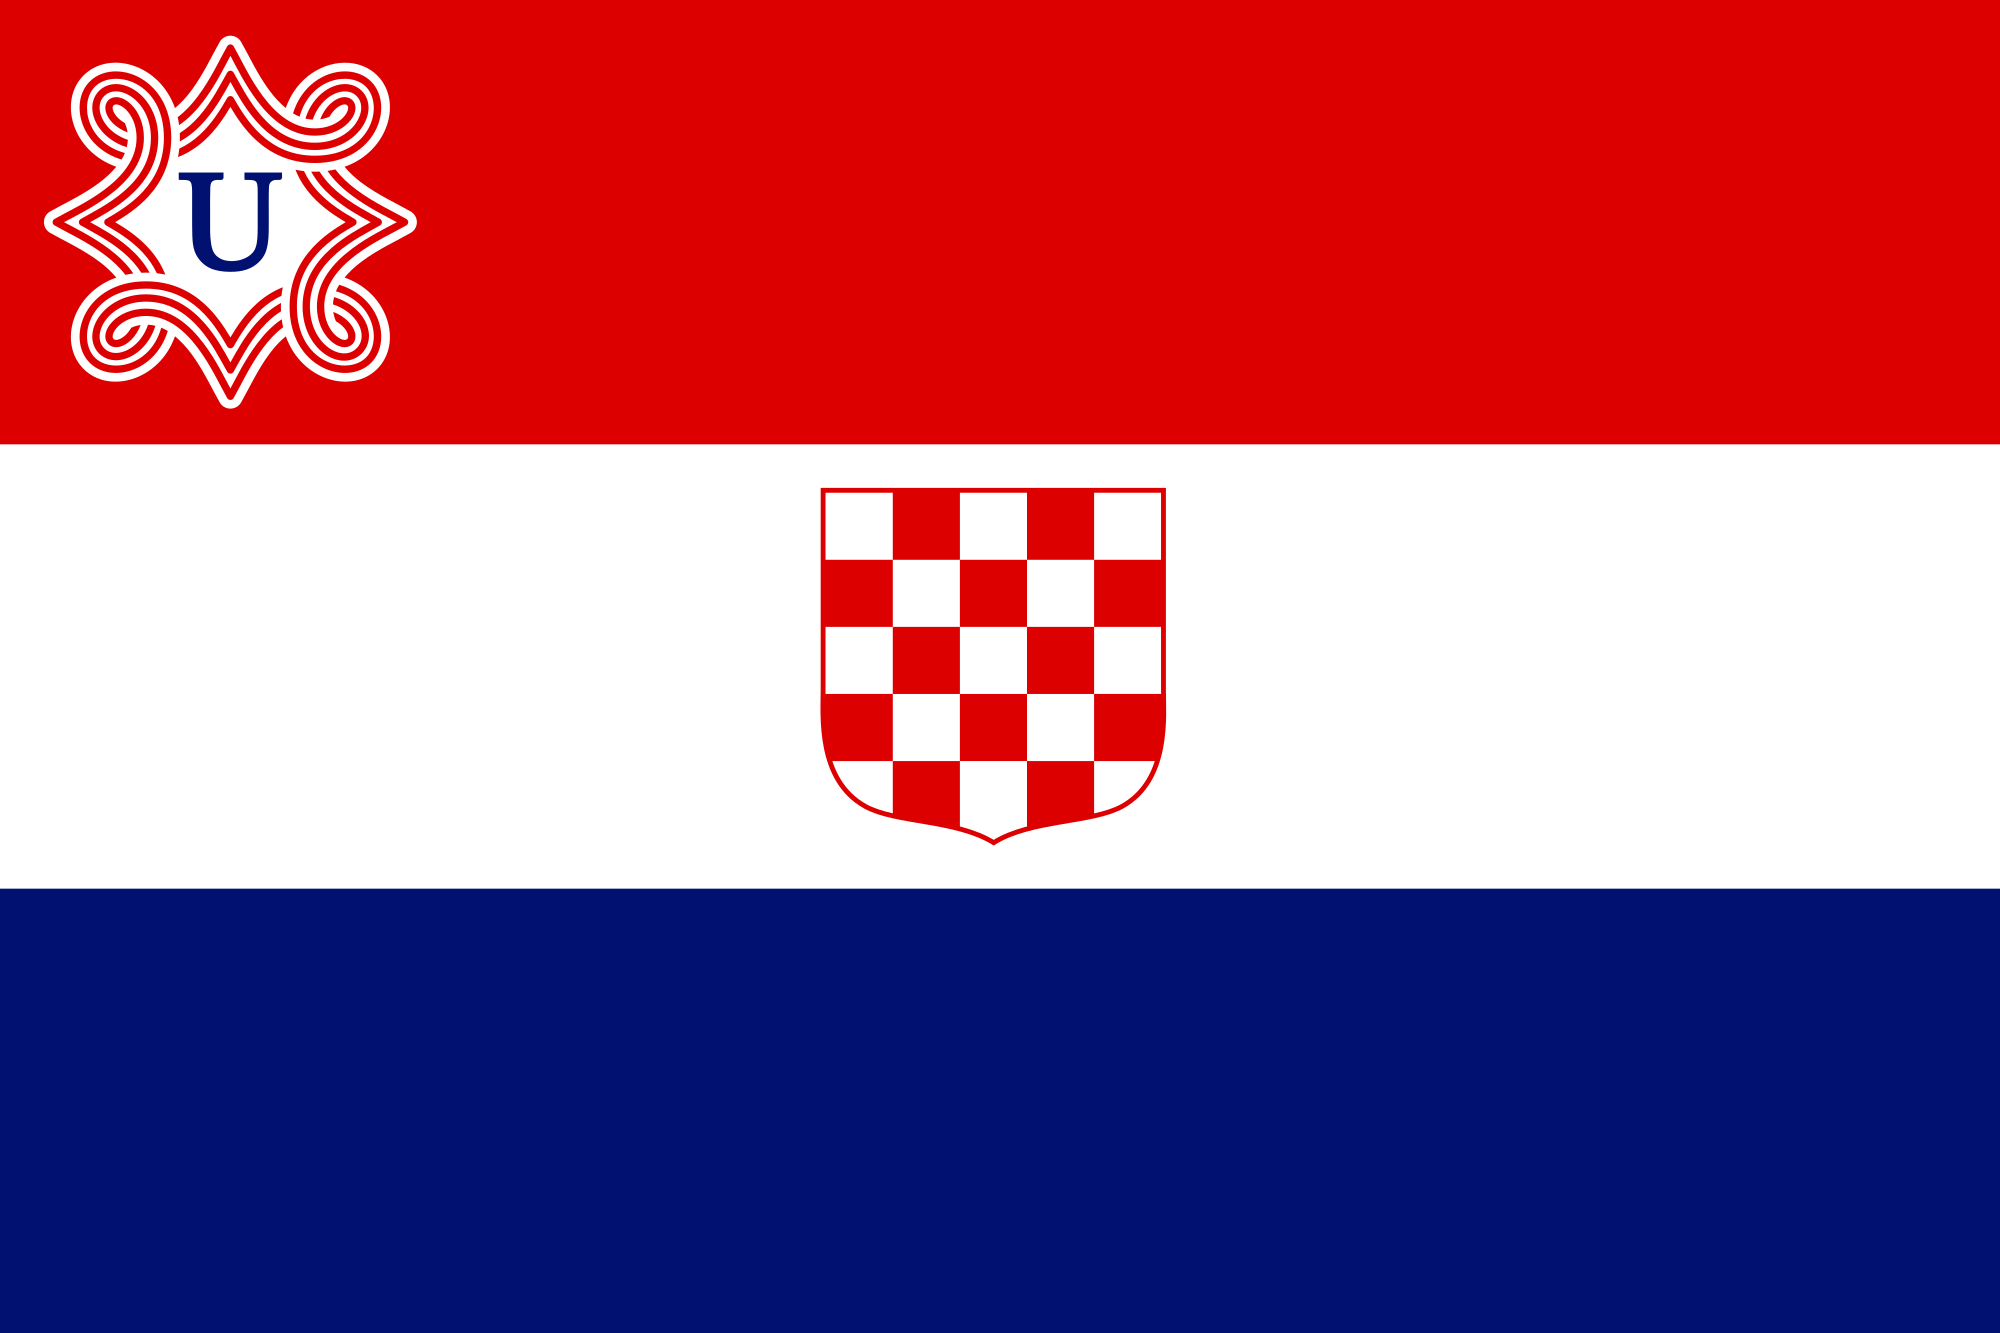 Independent State of Croatia